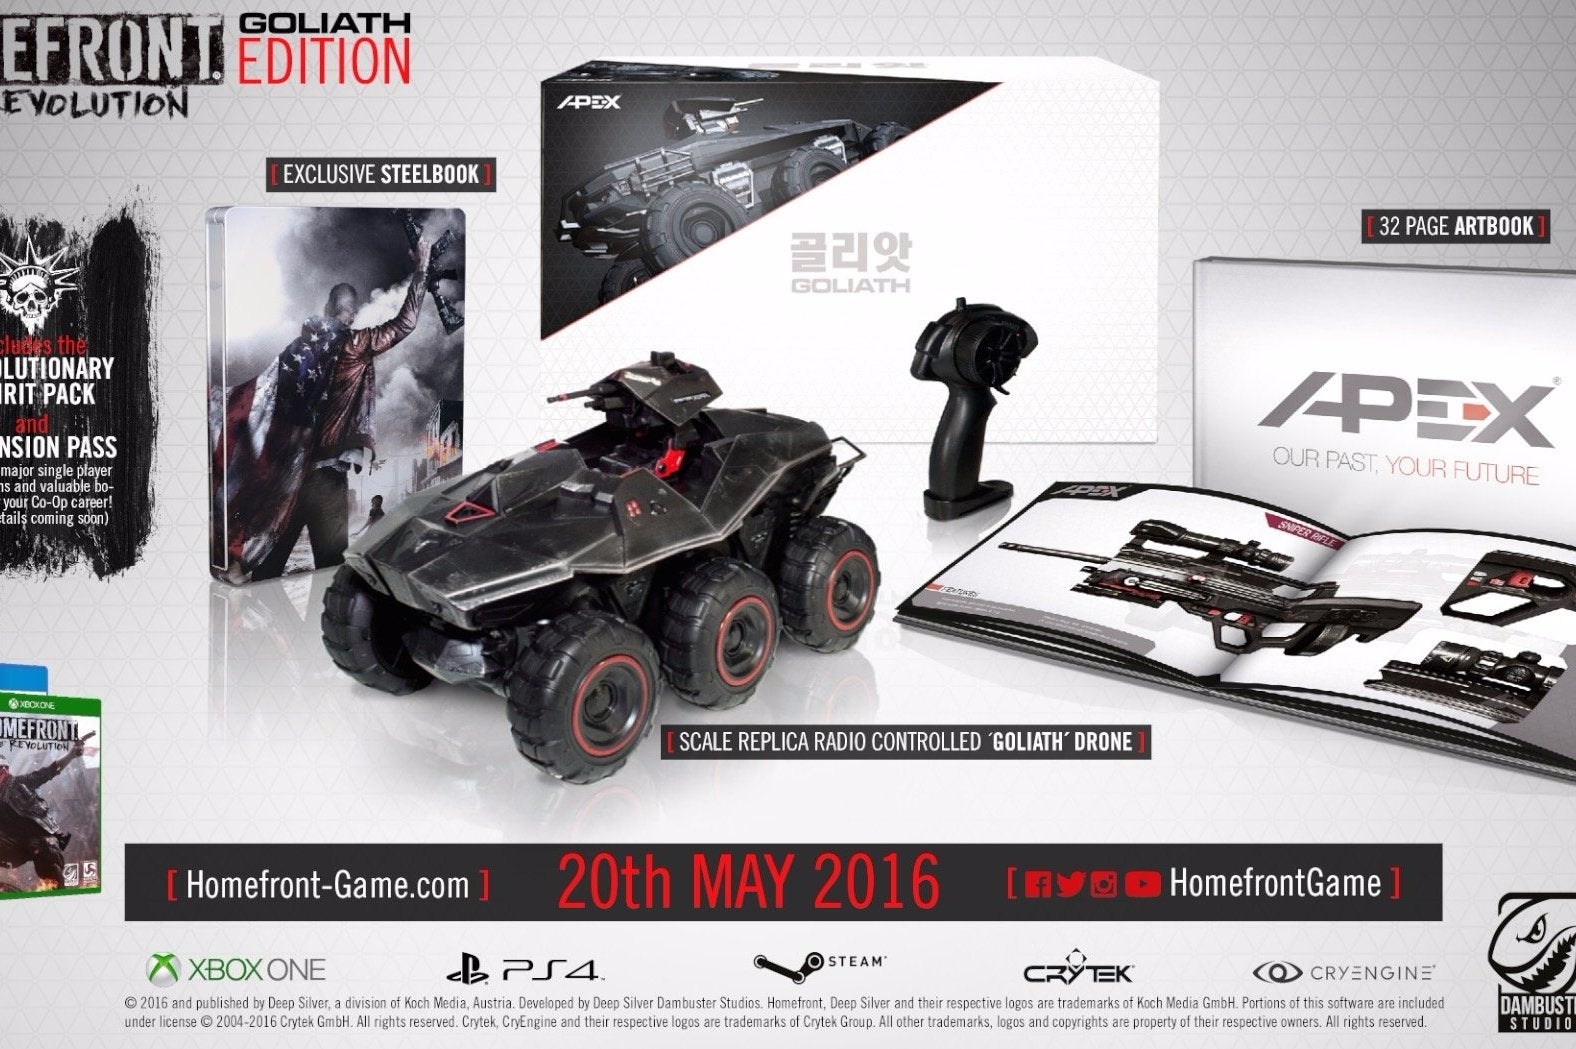 Image for Homefront: The Revolution's Goliath Edition comes with a real-life drone